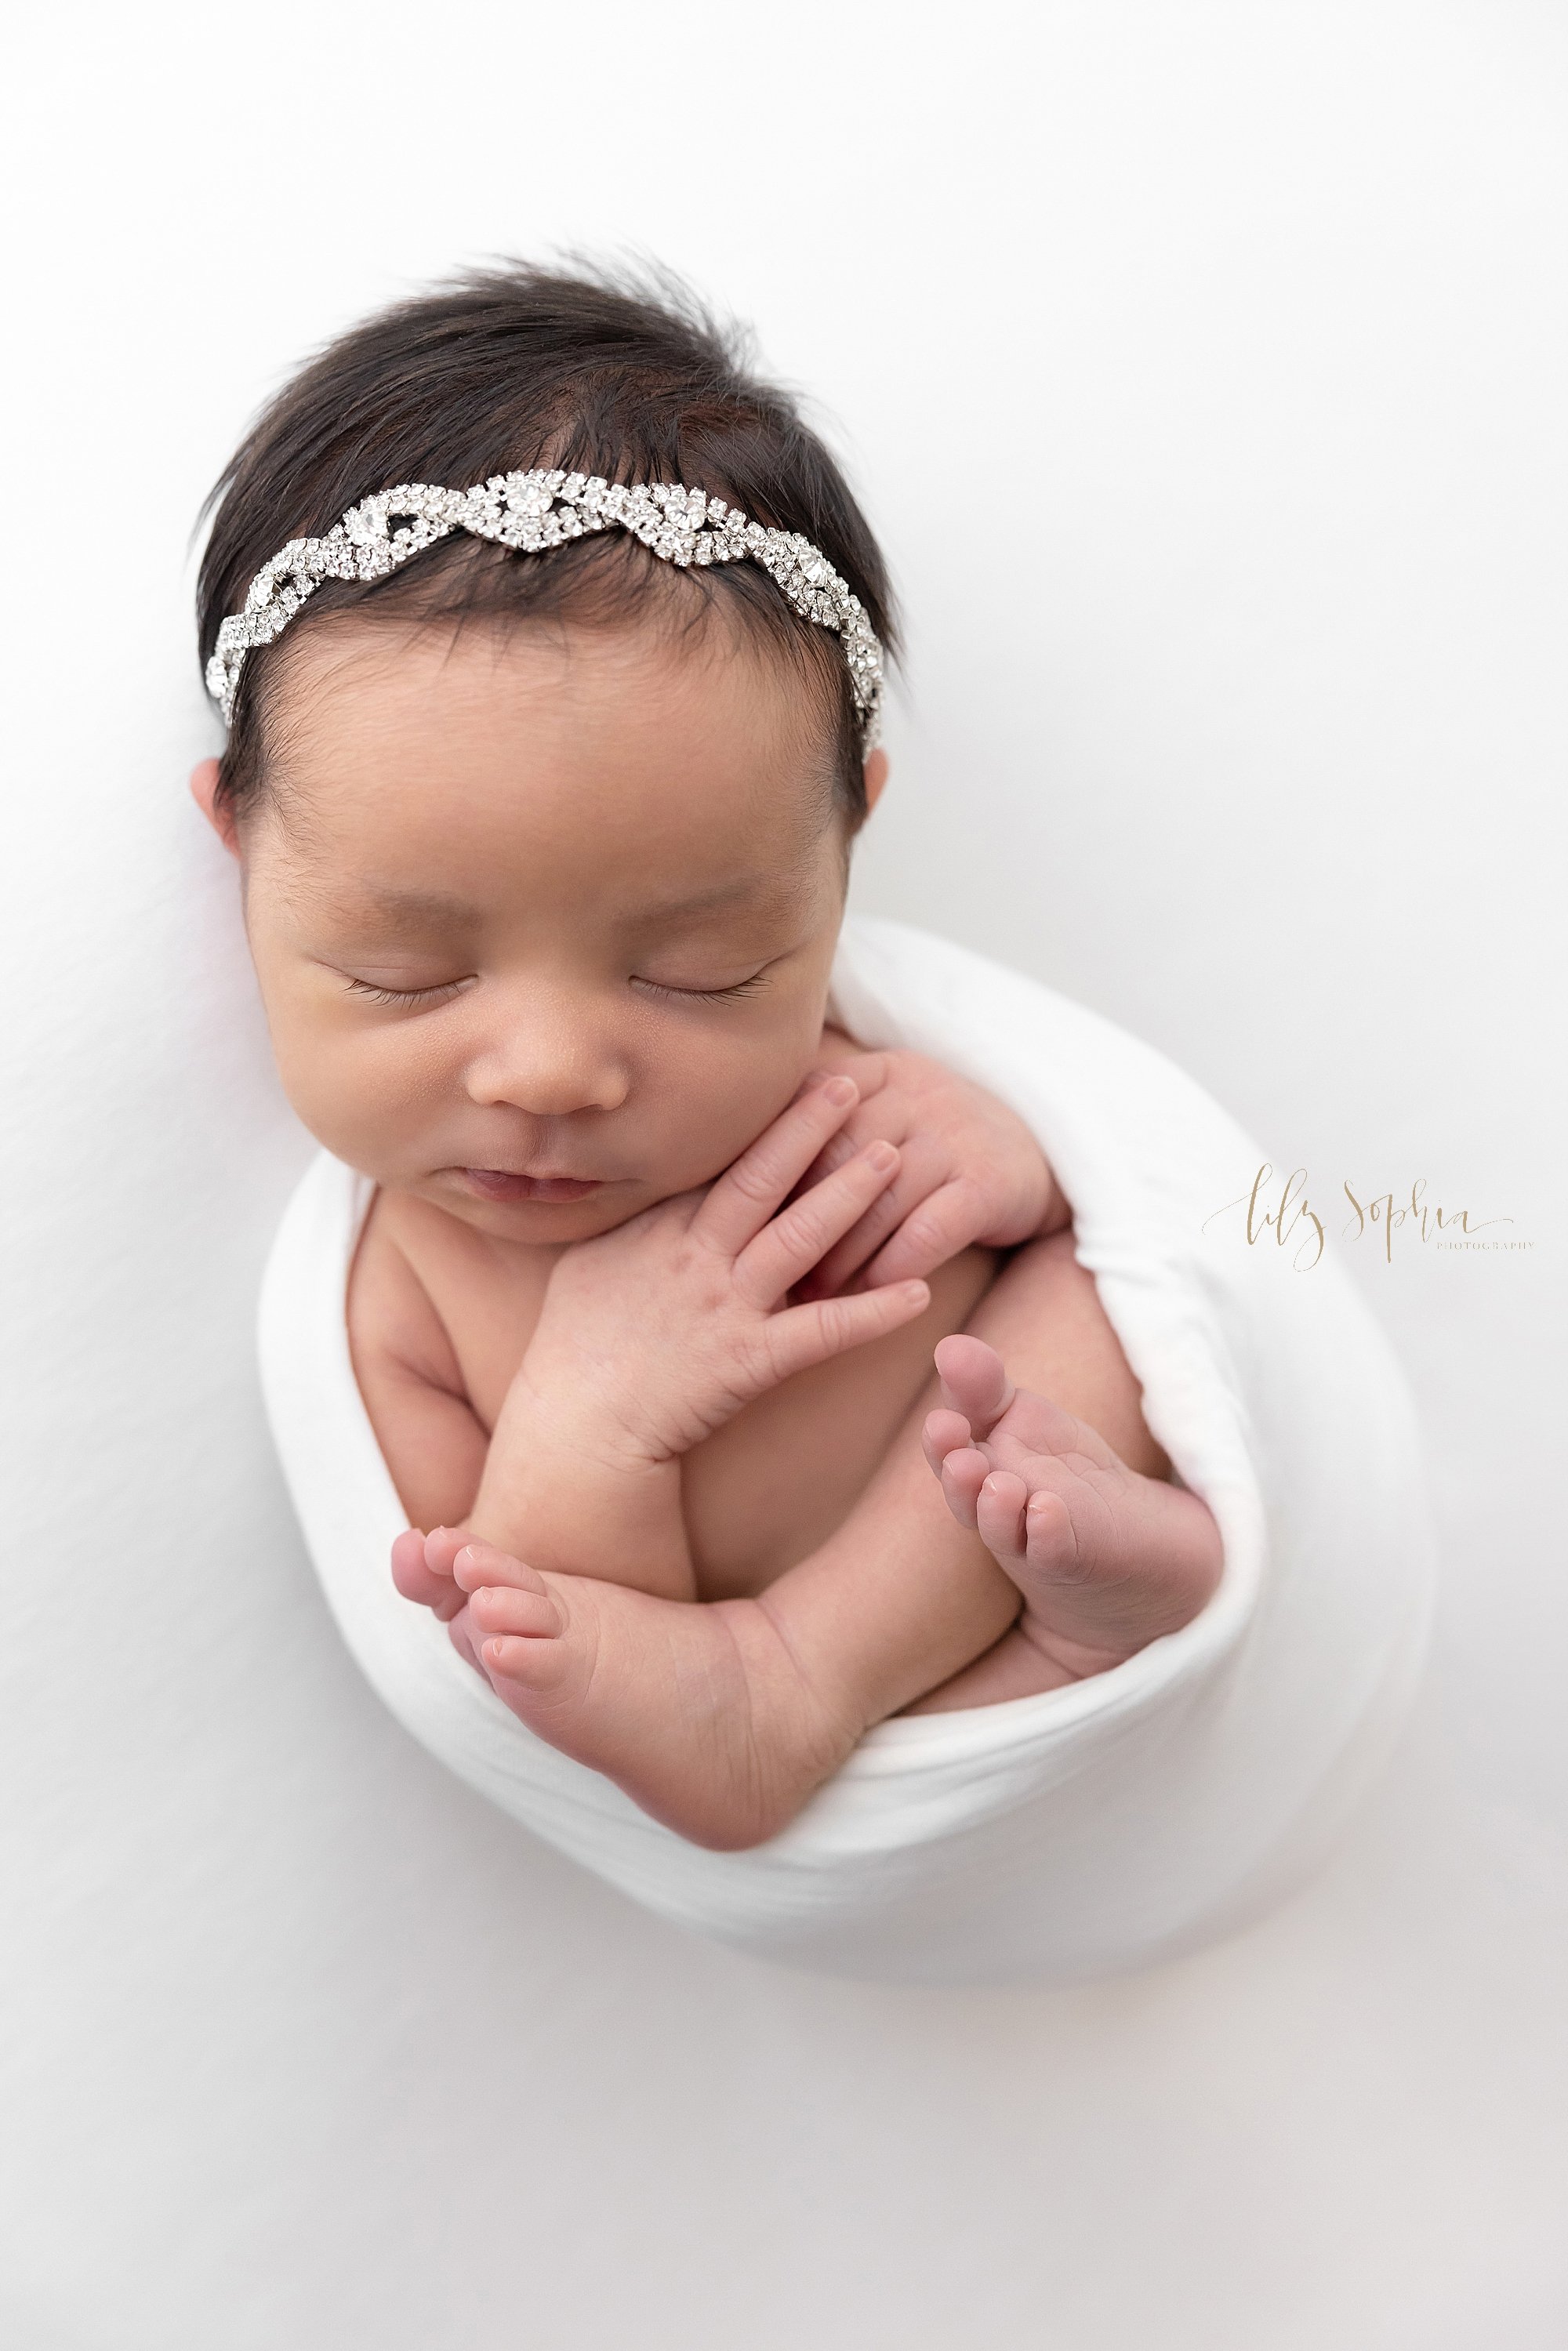  Newborn photo of a newborn baby girl wearing a rhinestone headband in her black wispy hair as she is cradled in a stretchy swaddle taken using natural light near Alpharetta in Atlanta in a photography studio. 